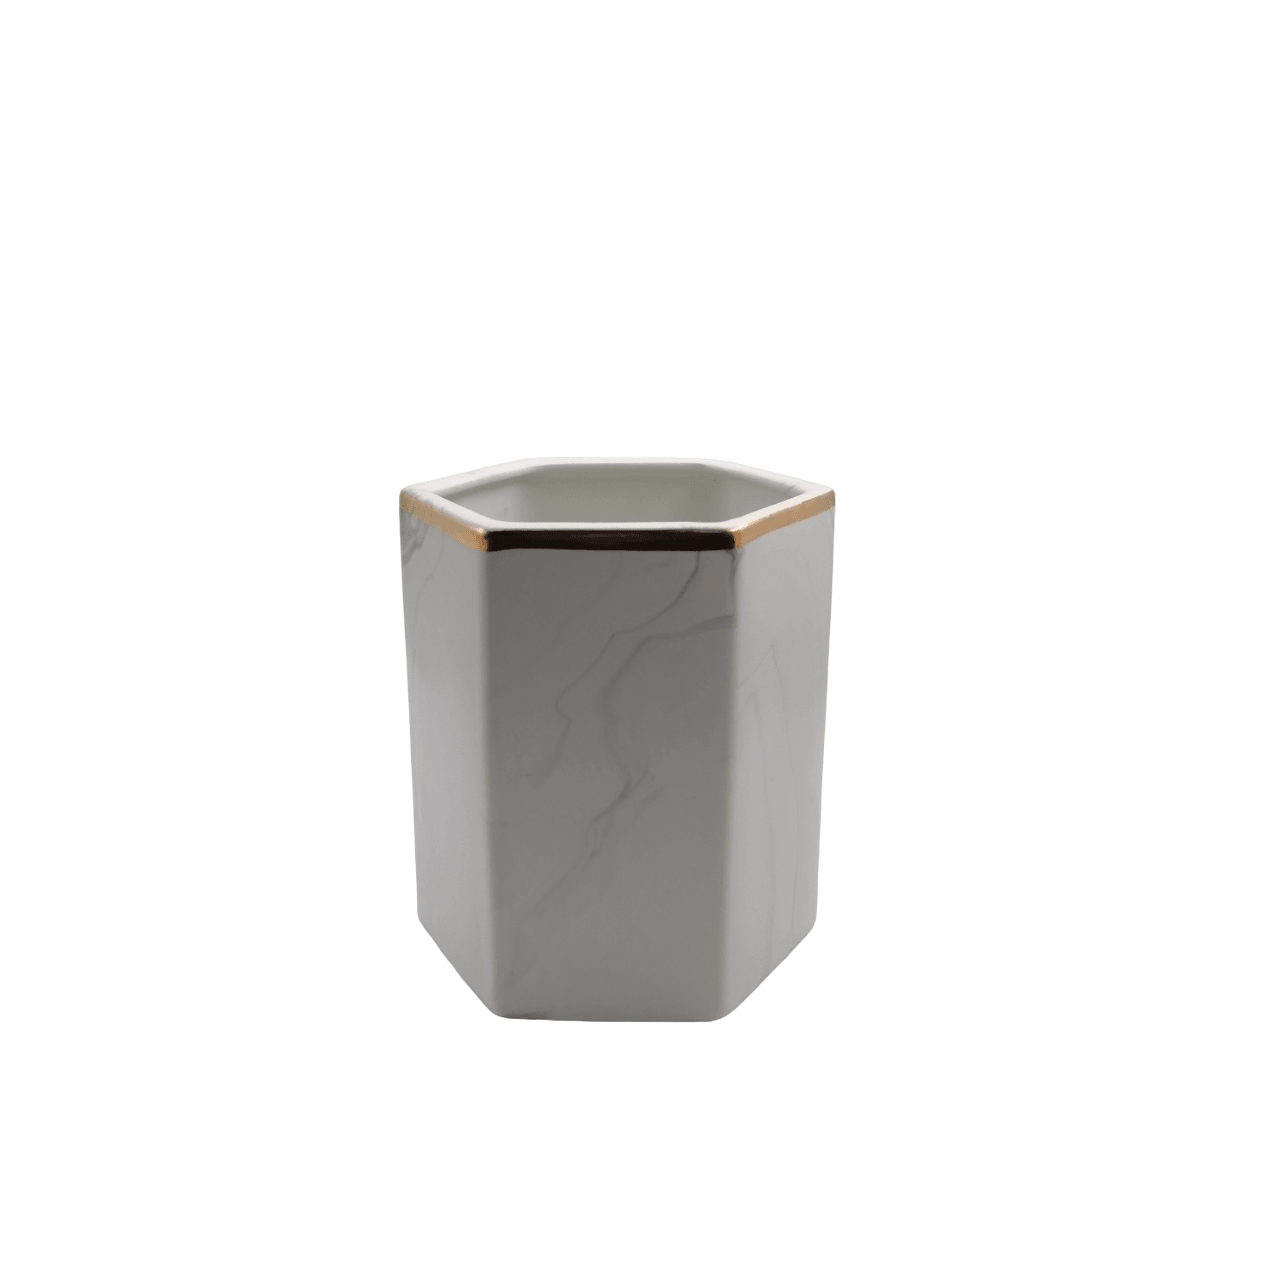 Ceramic Marble Style Hexagonal Shaped Vase - Home And Trends